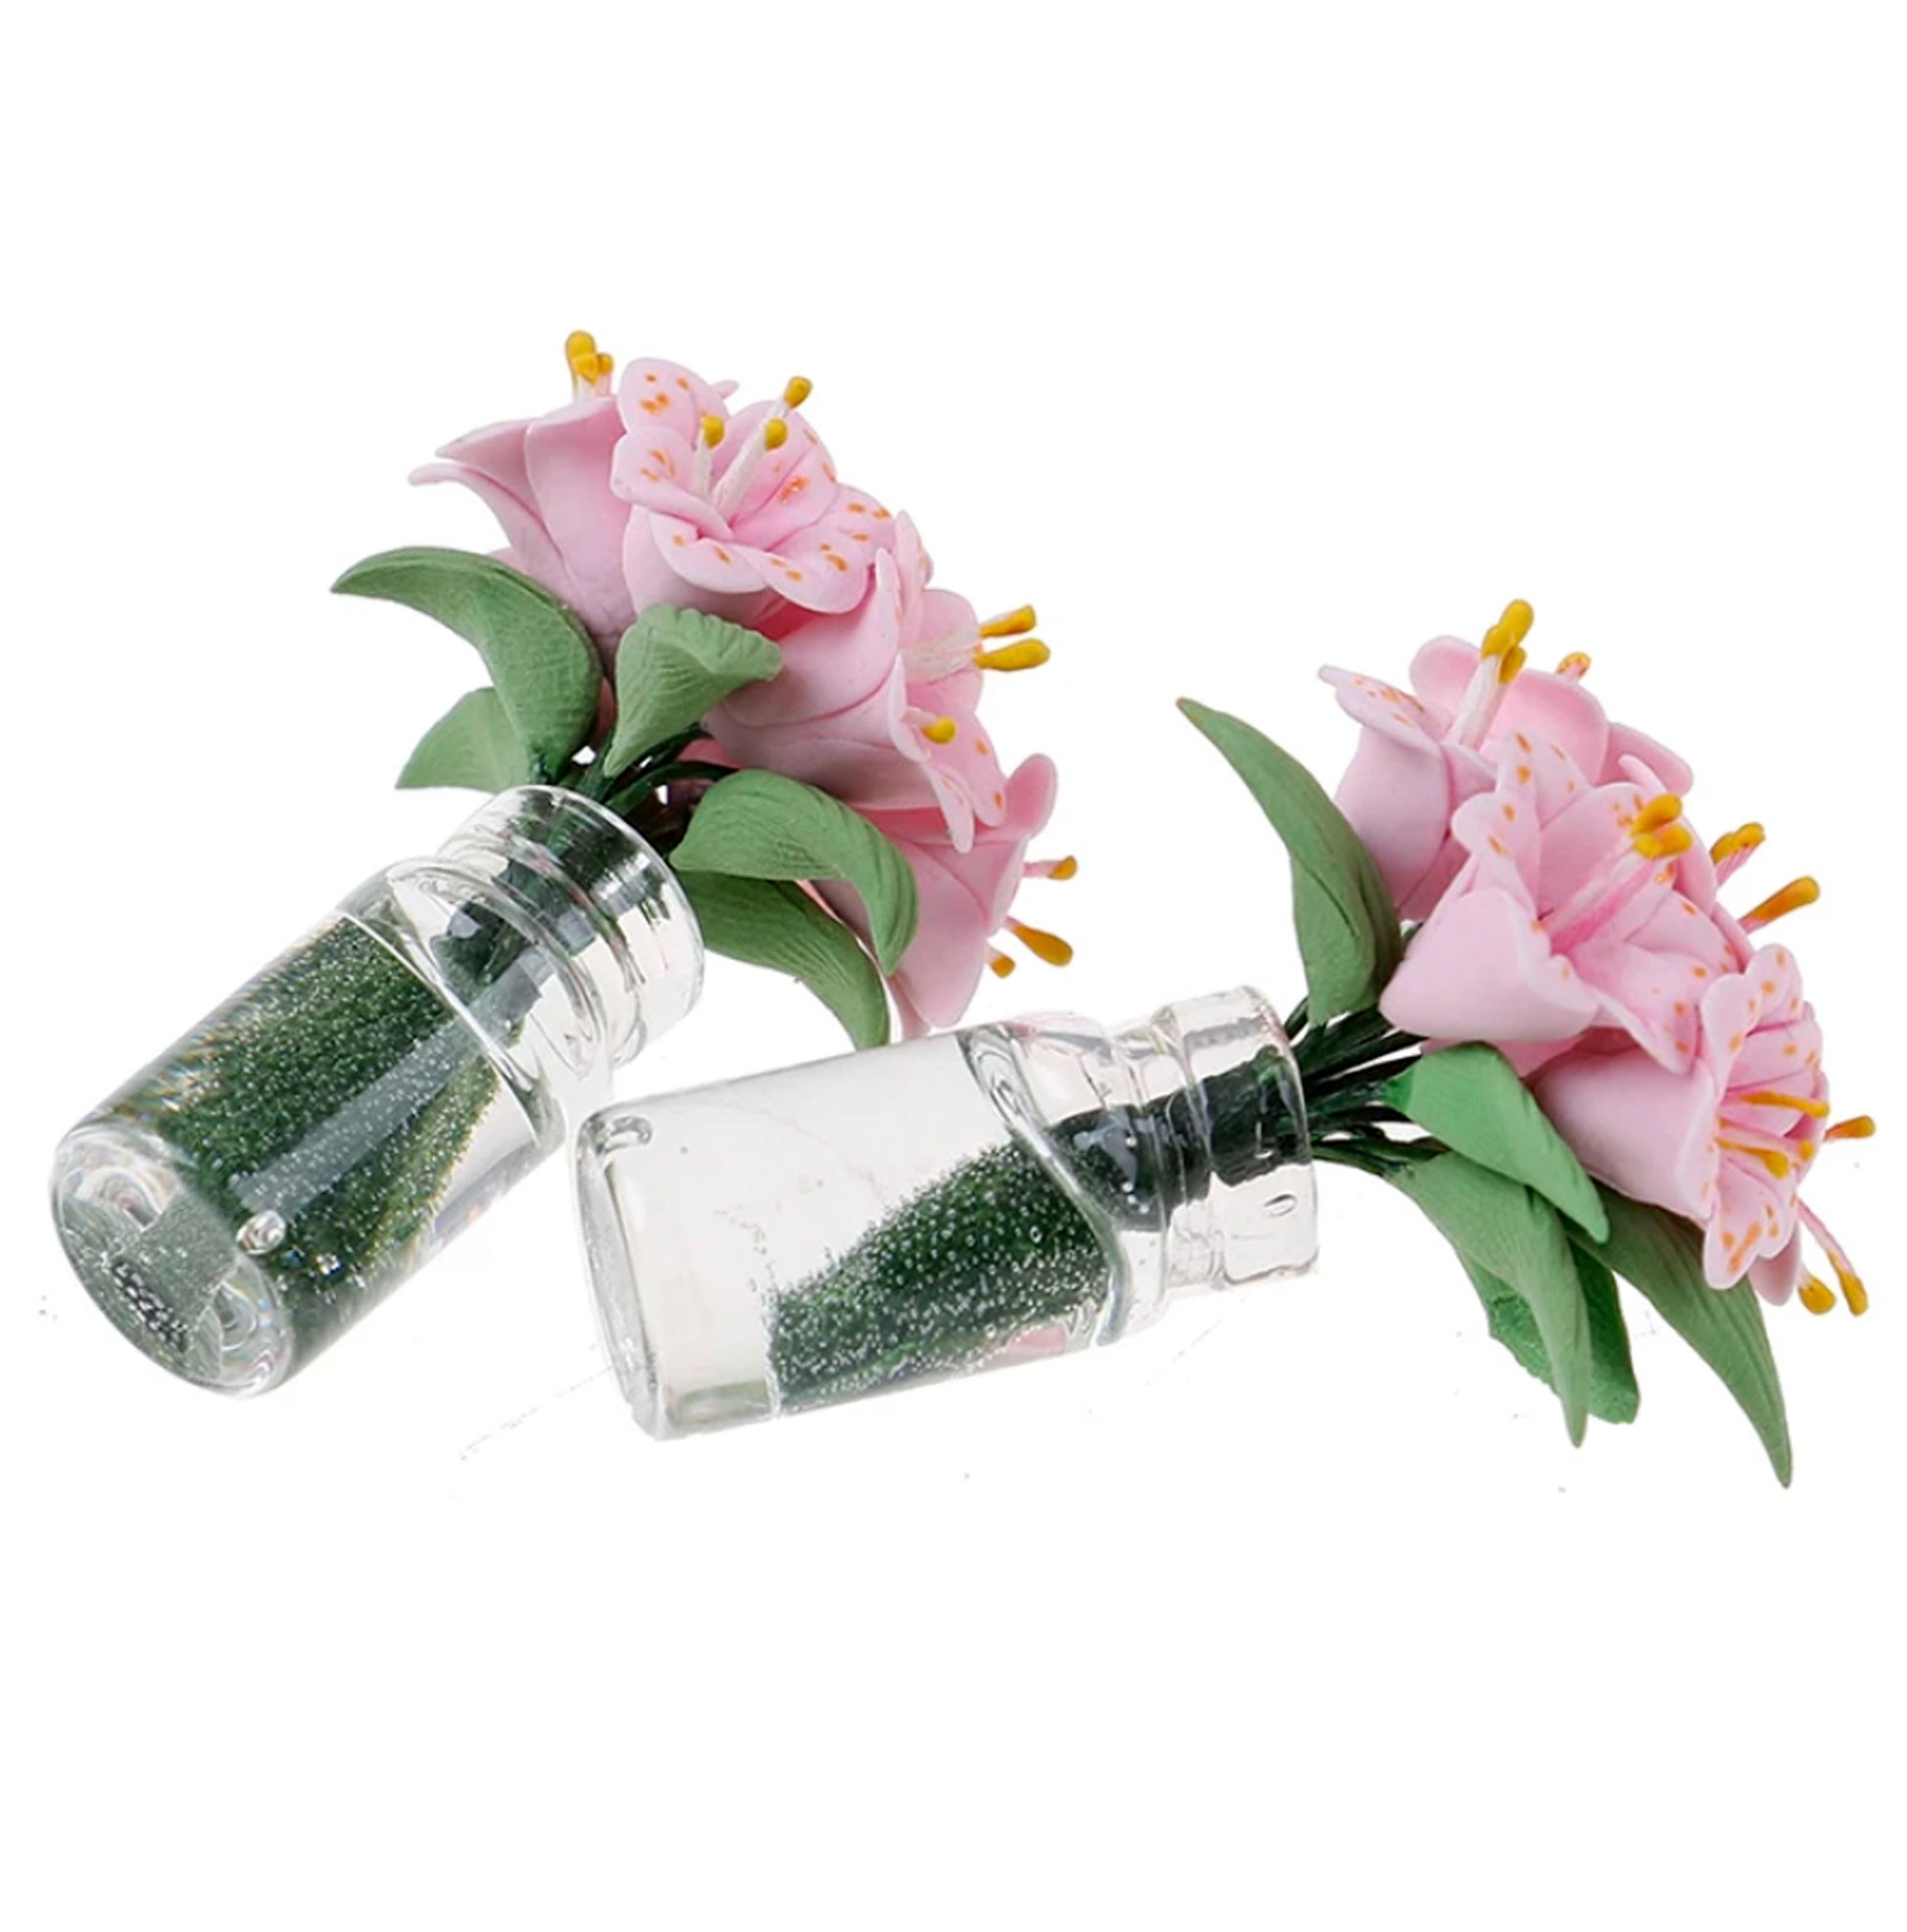 Pink-Lilies-in-Glass-Vase-side-view